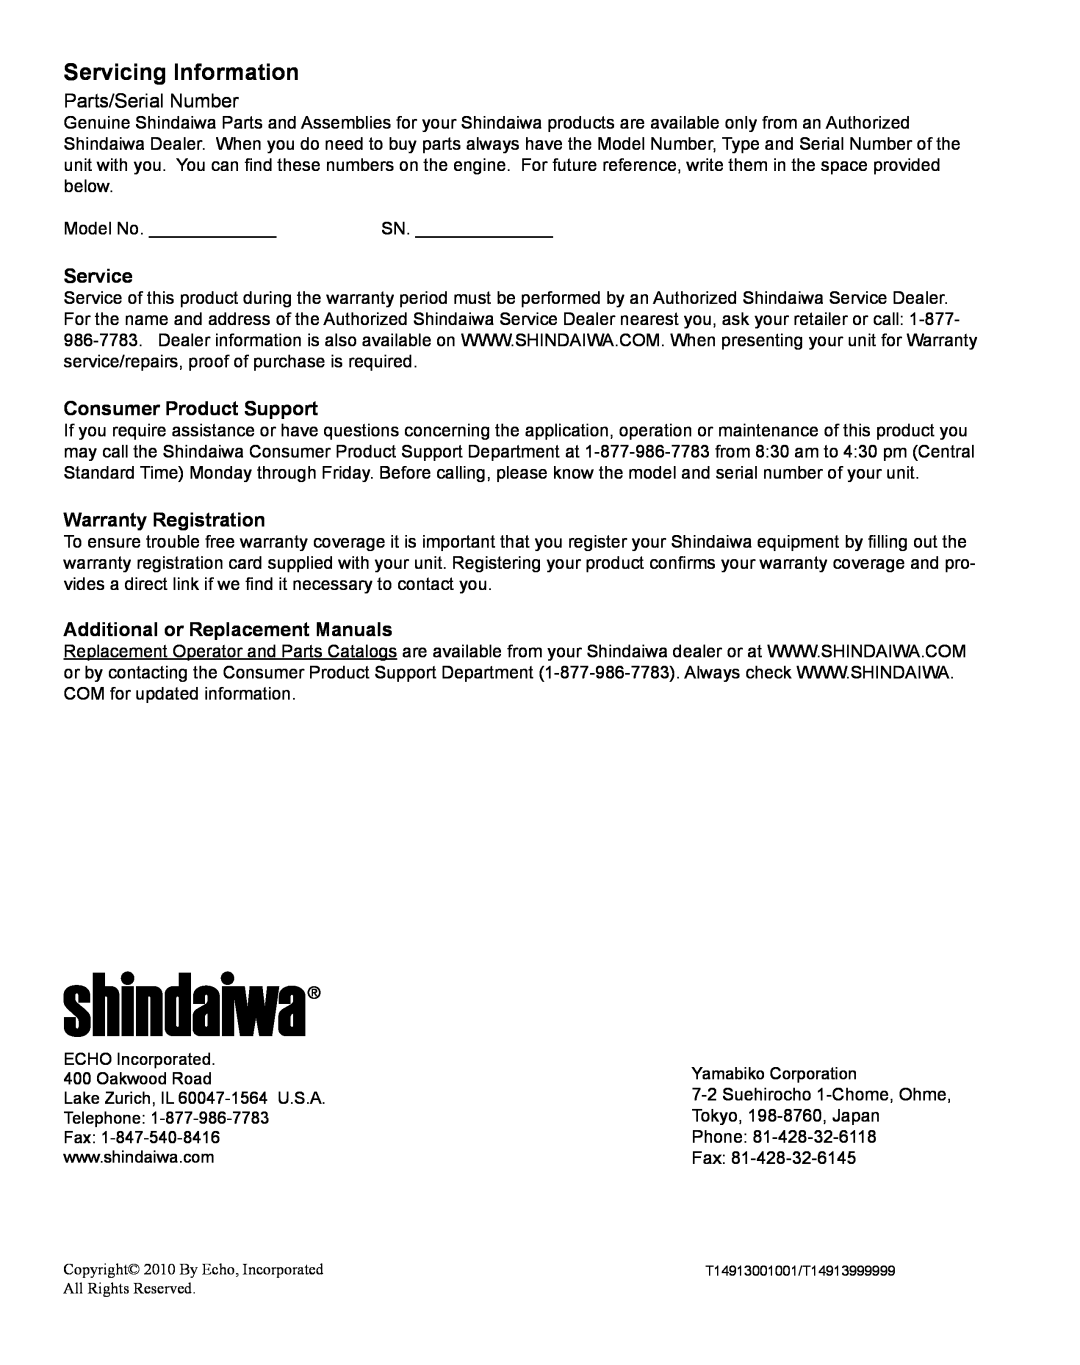 Shindaiwa X7502831500 Servicing Information, Service, Consumer Product Support, Warranty Registration, Parts/Serial Number 